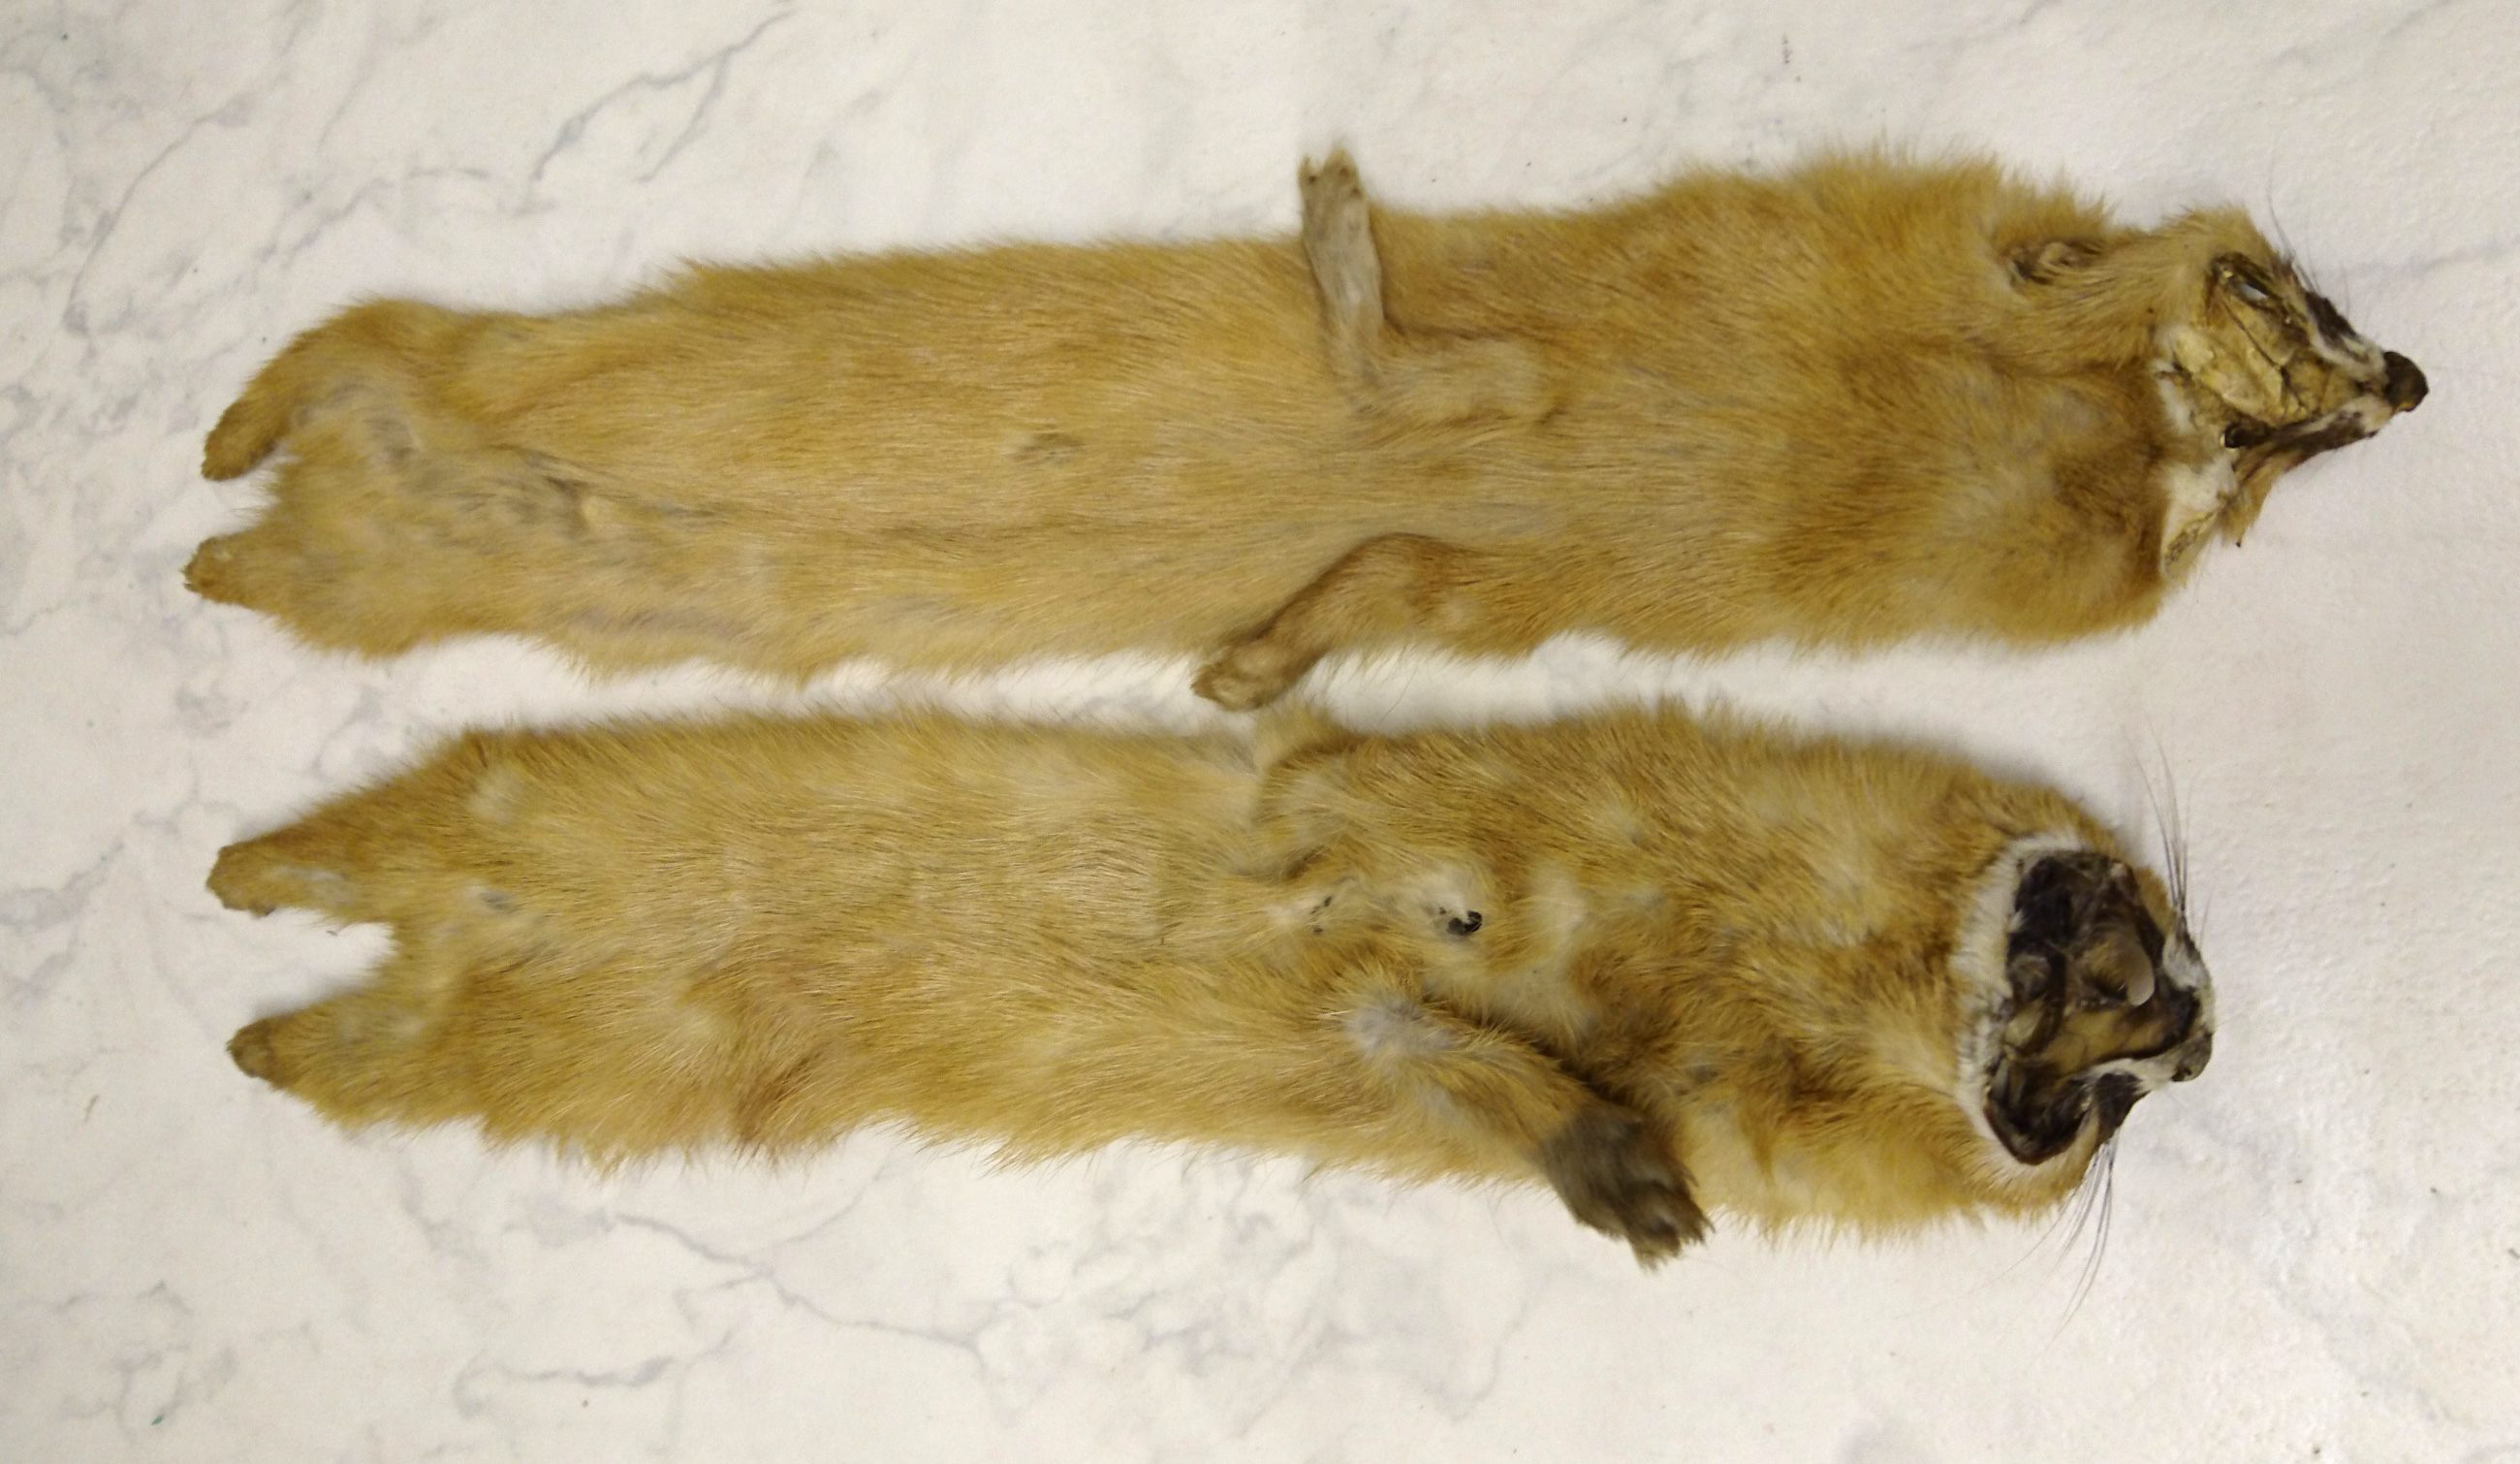 Raw Weasel Skins from Sojuzpushnina (with CITES)